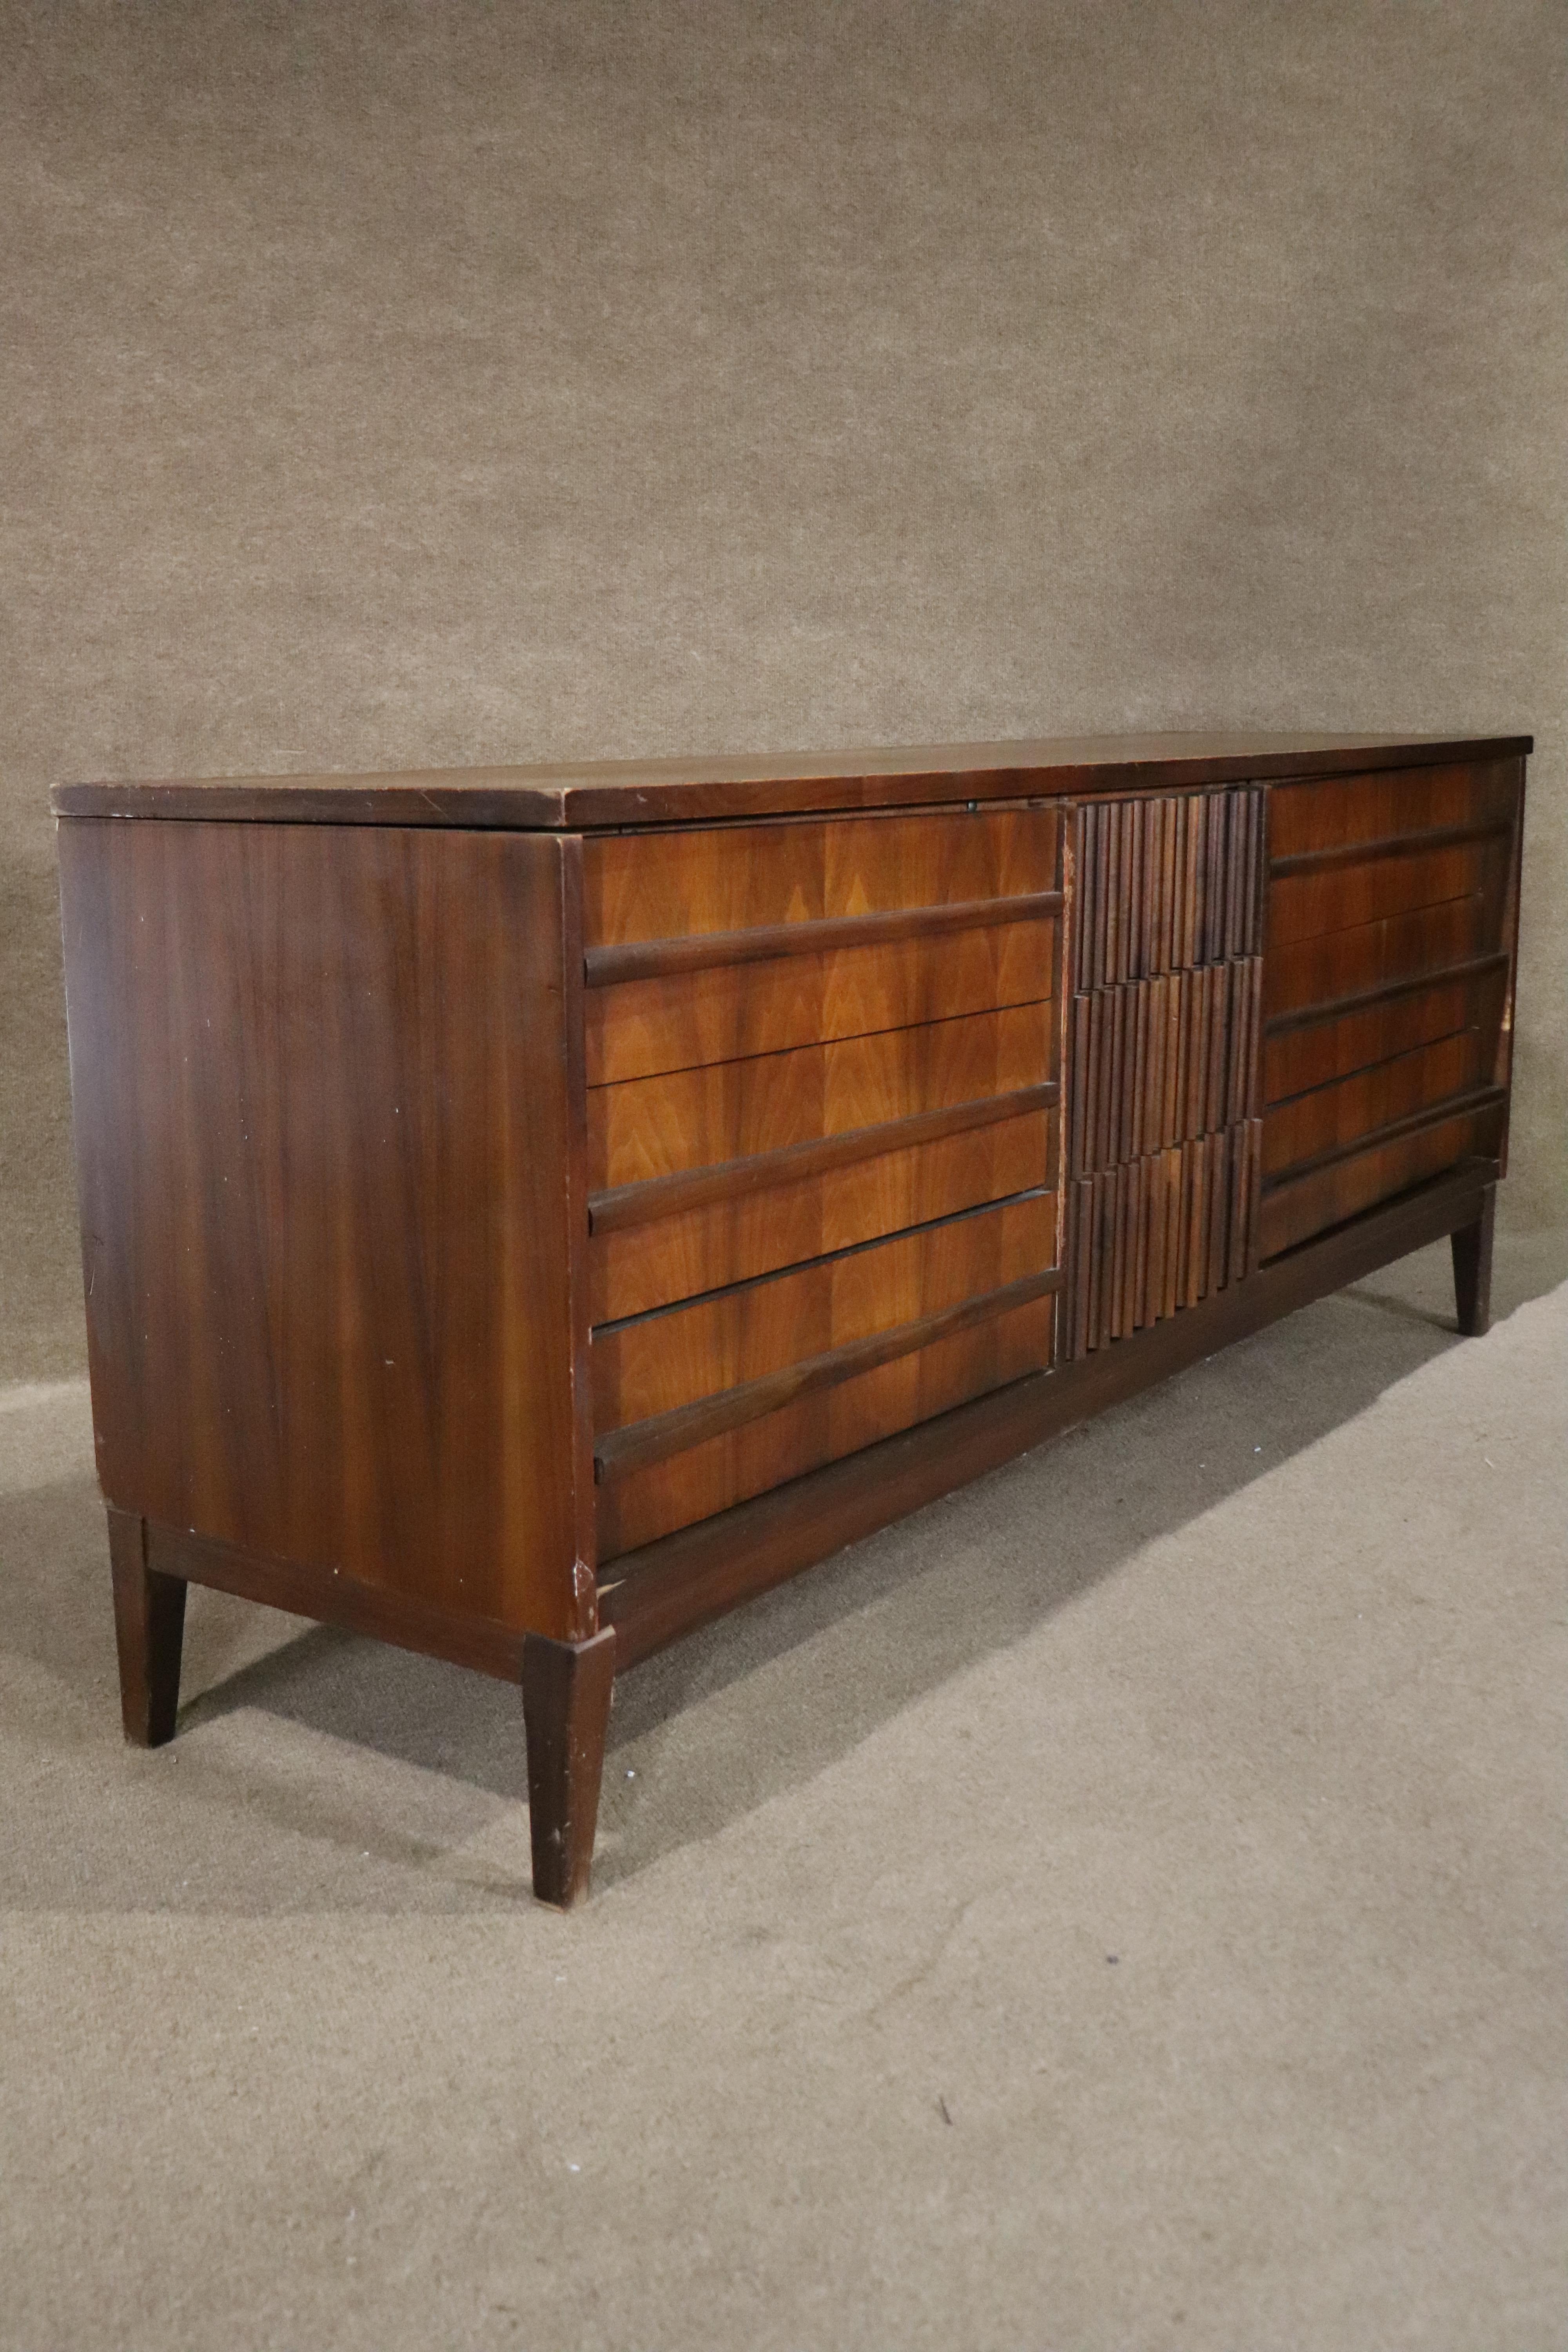 Long walnut dresser with curved front and matching mirror. Nine drawers with sculpted front design and burl wood.
Mirror: 52w, 36h
Please confirm location NY or NJ